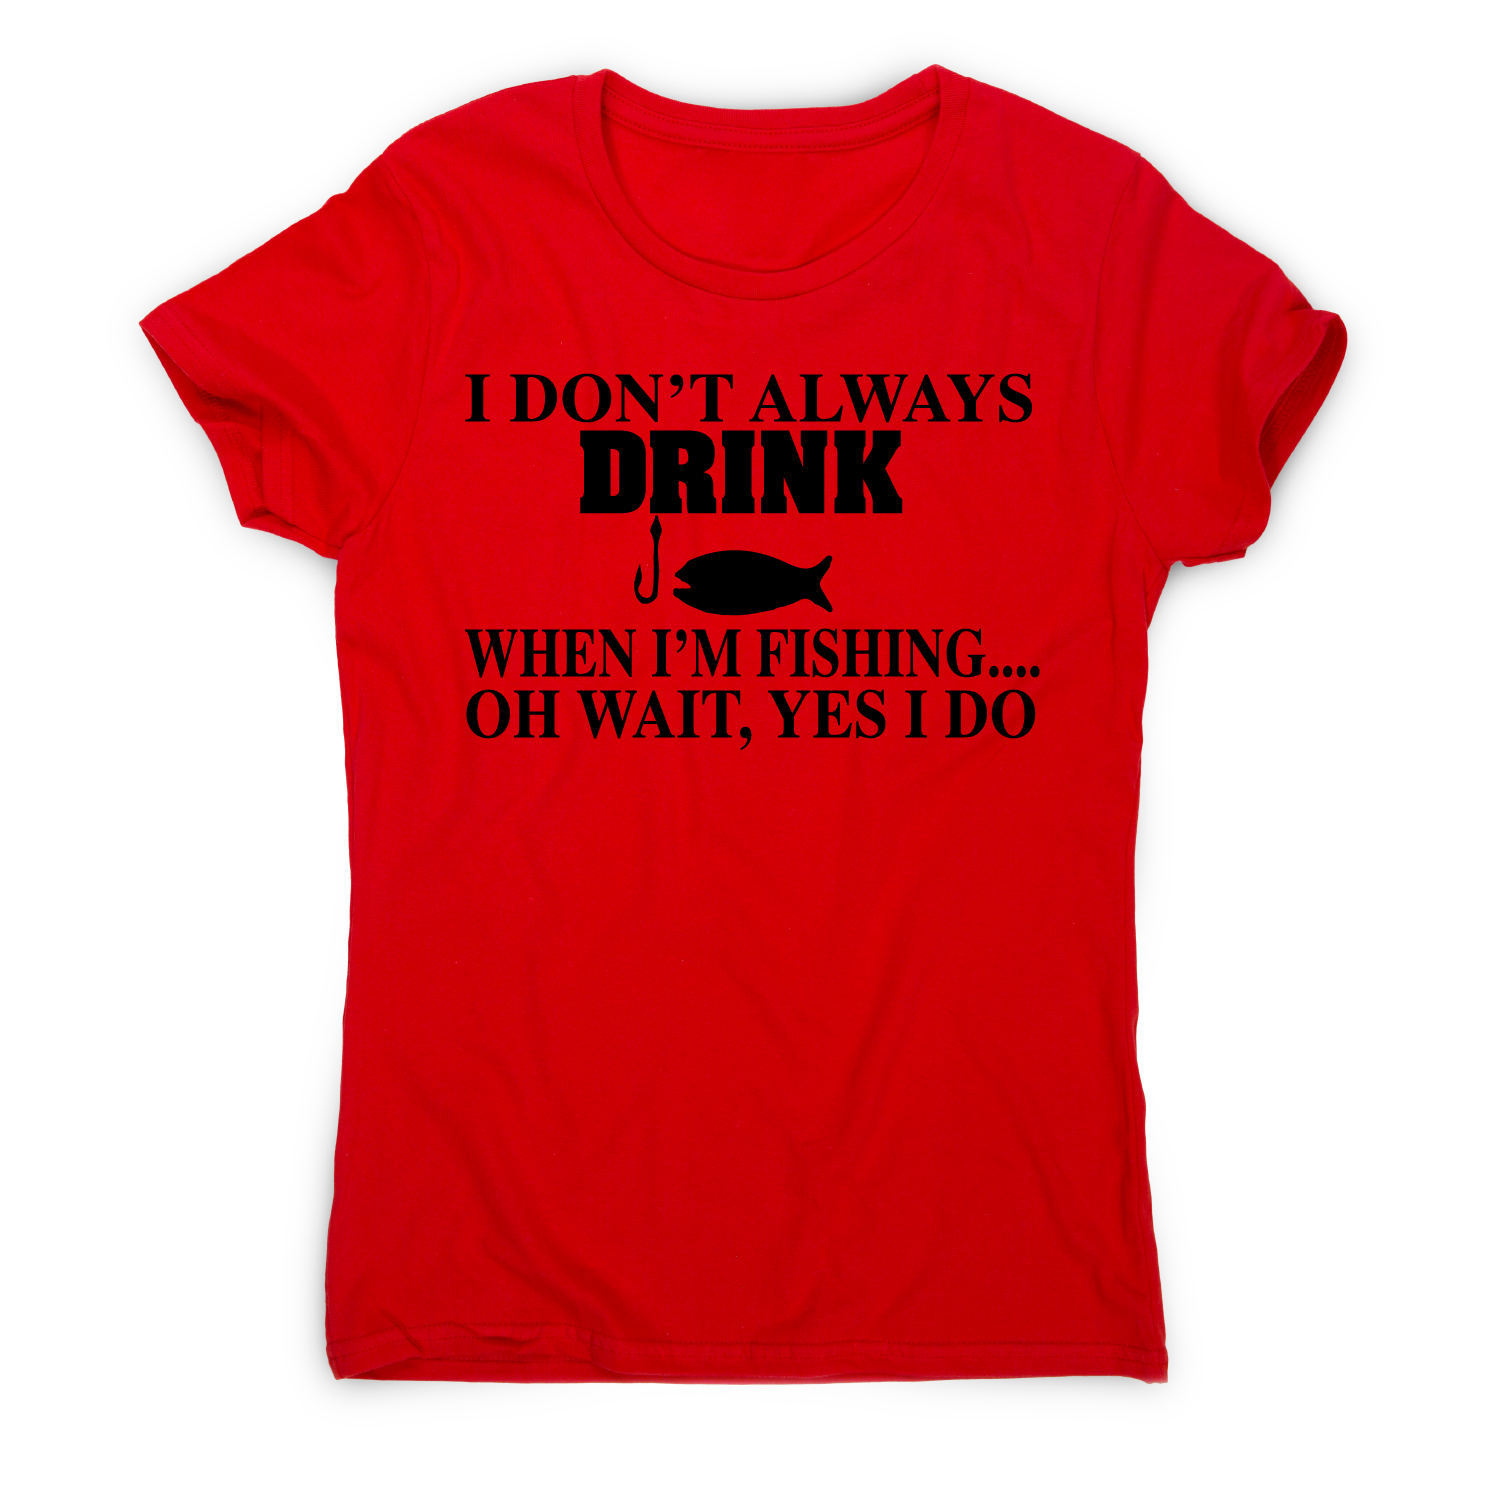 I don't always drink funny fishing t-shirt women's– Graphic Gear